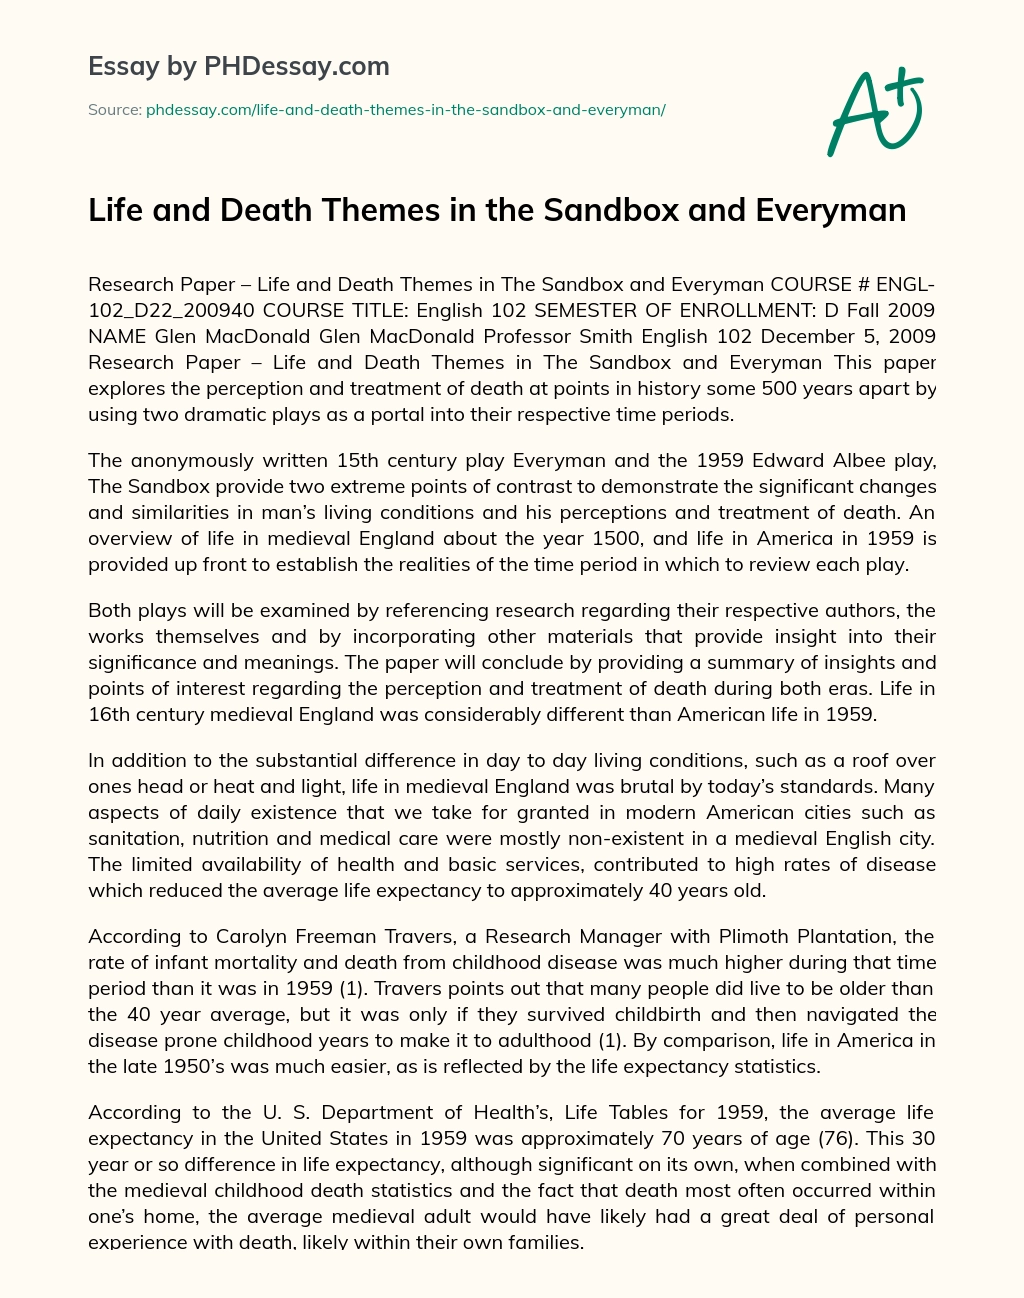 Life and Death Themes in the Sandbox and Everyman essay